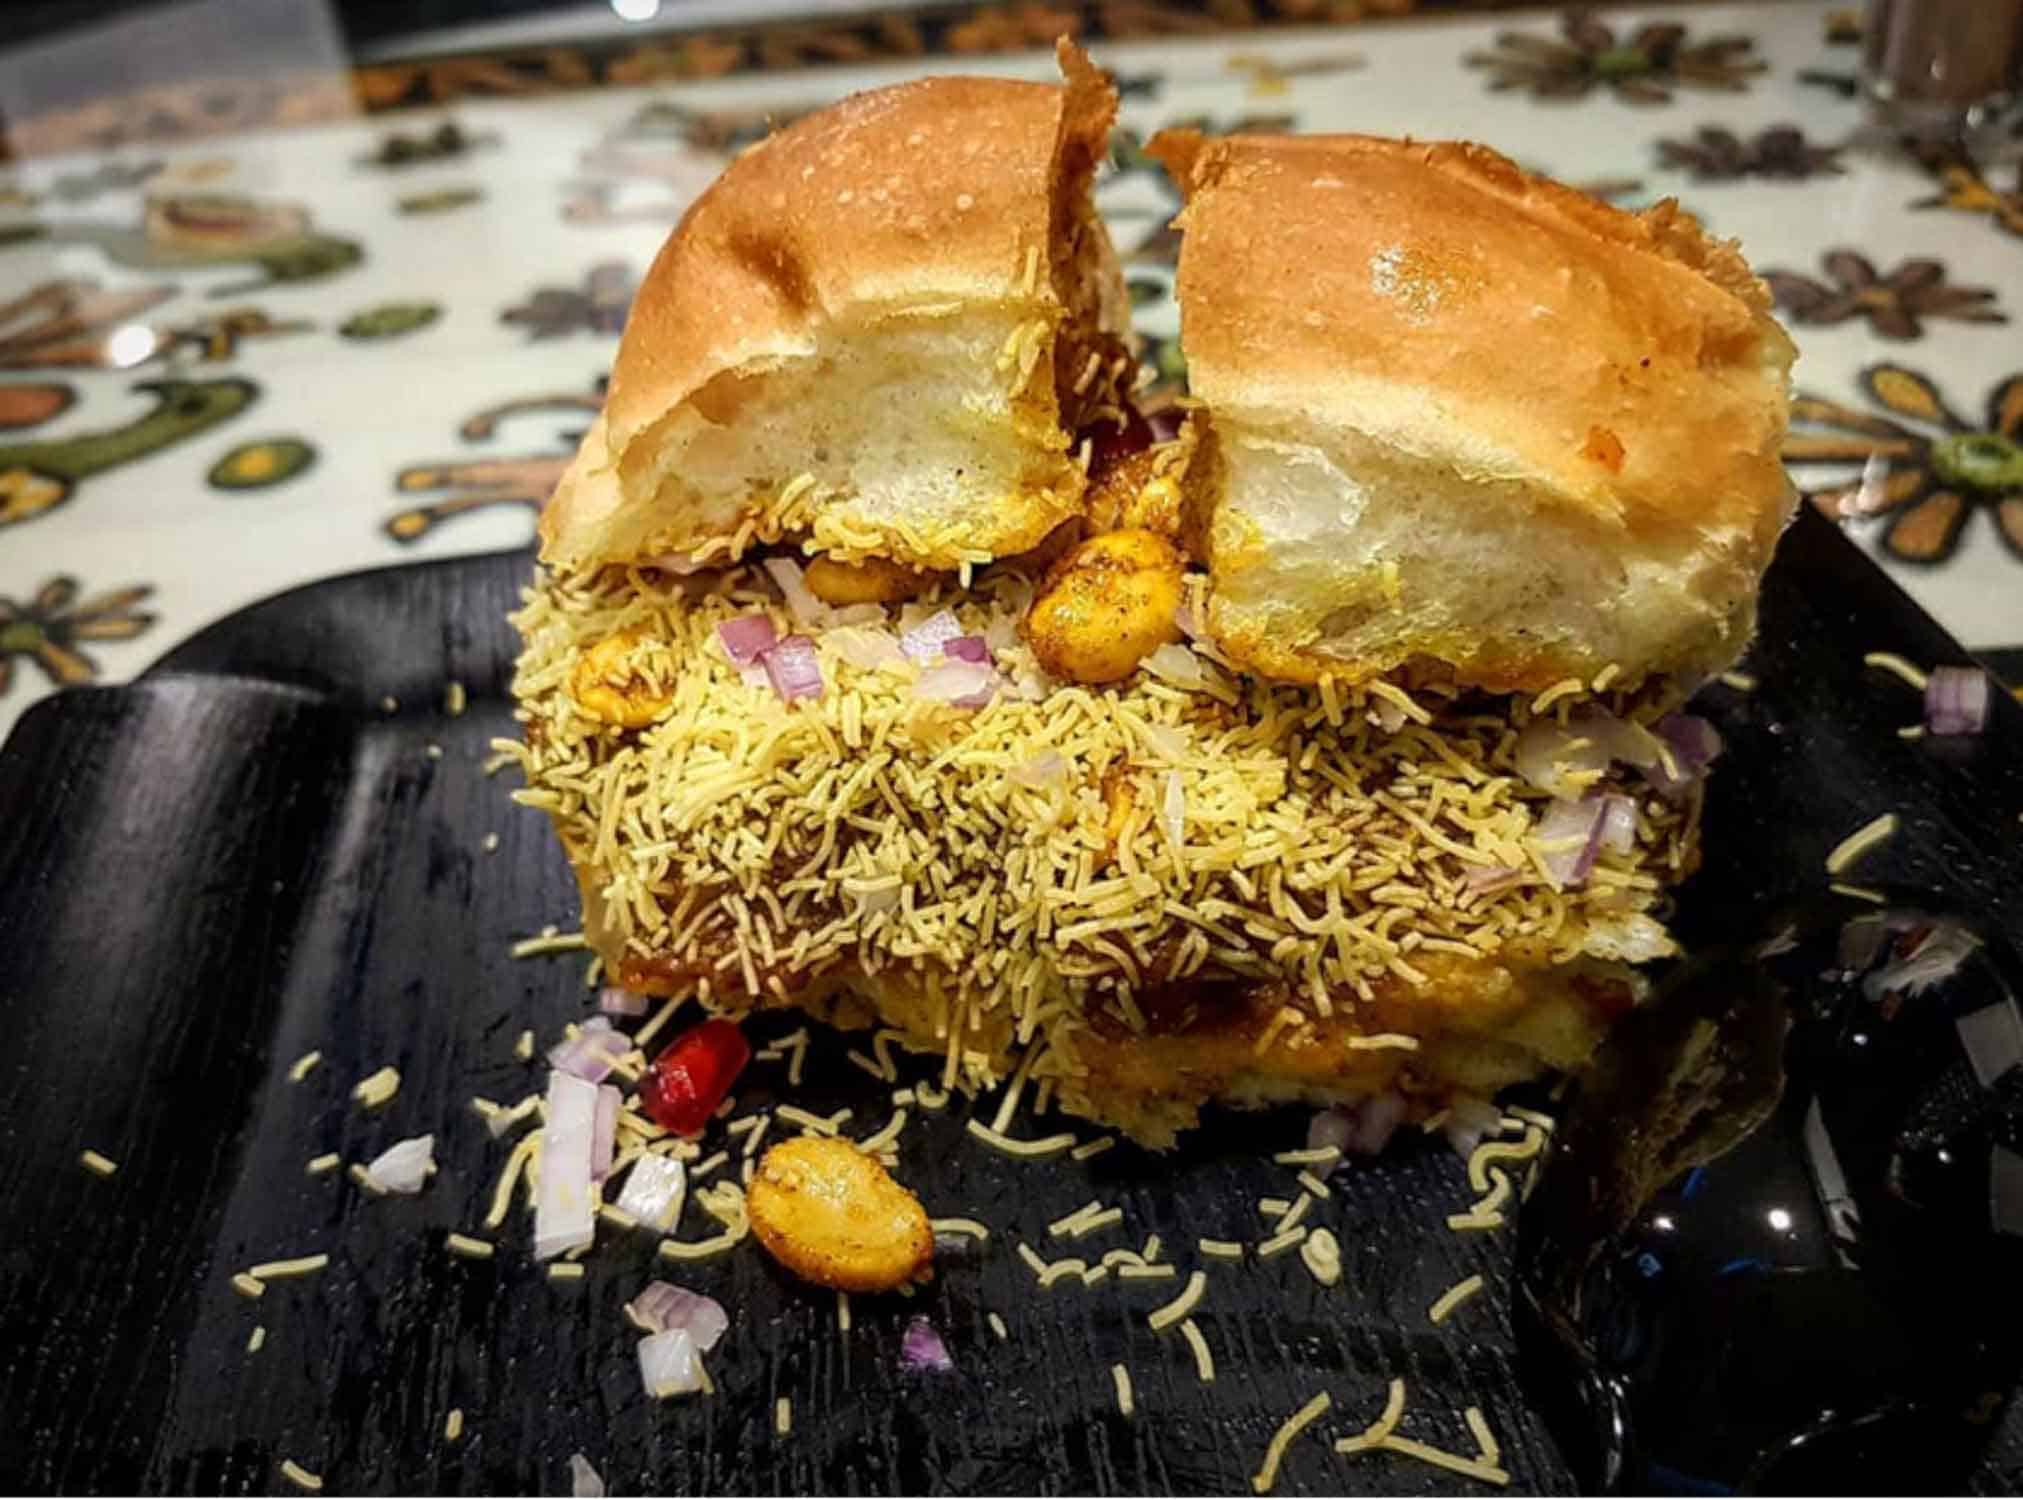 Dabeli from India is one of the best sandwiches in the world.